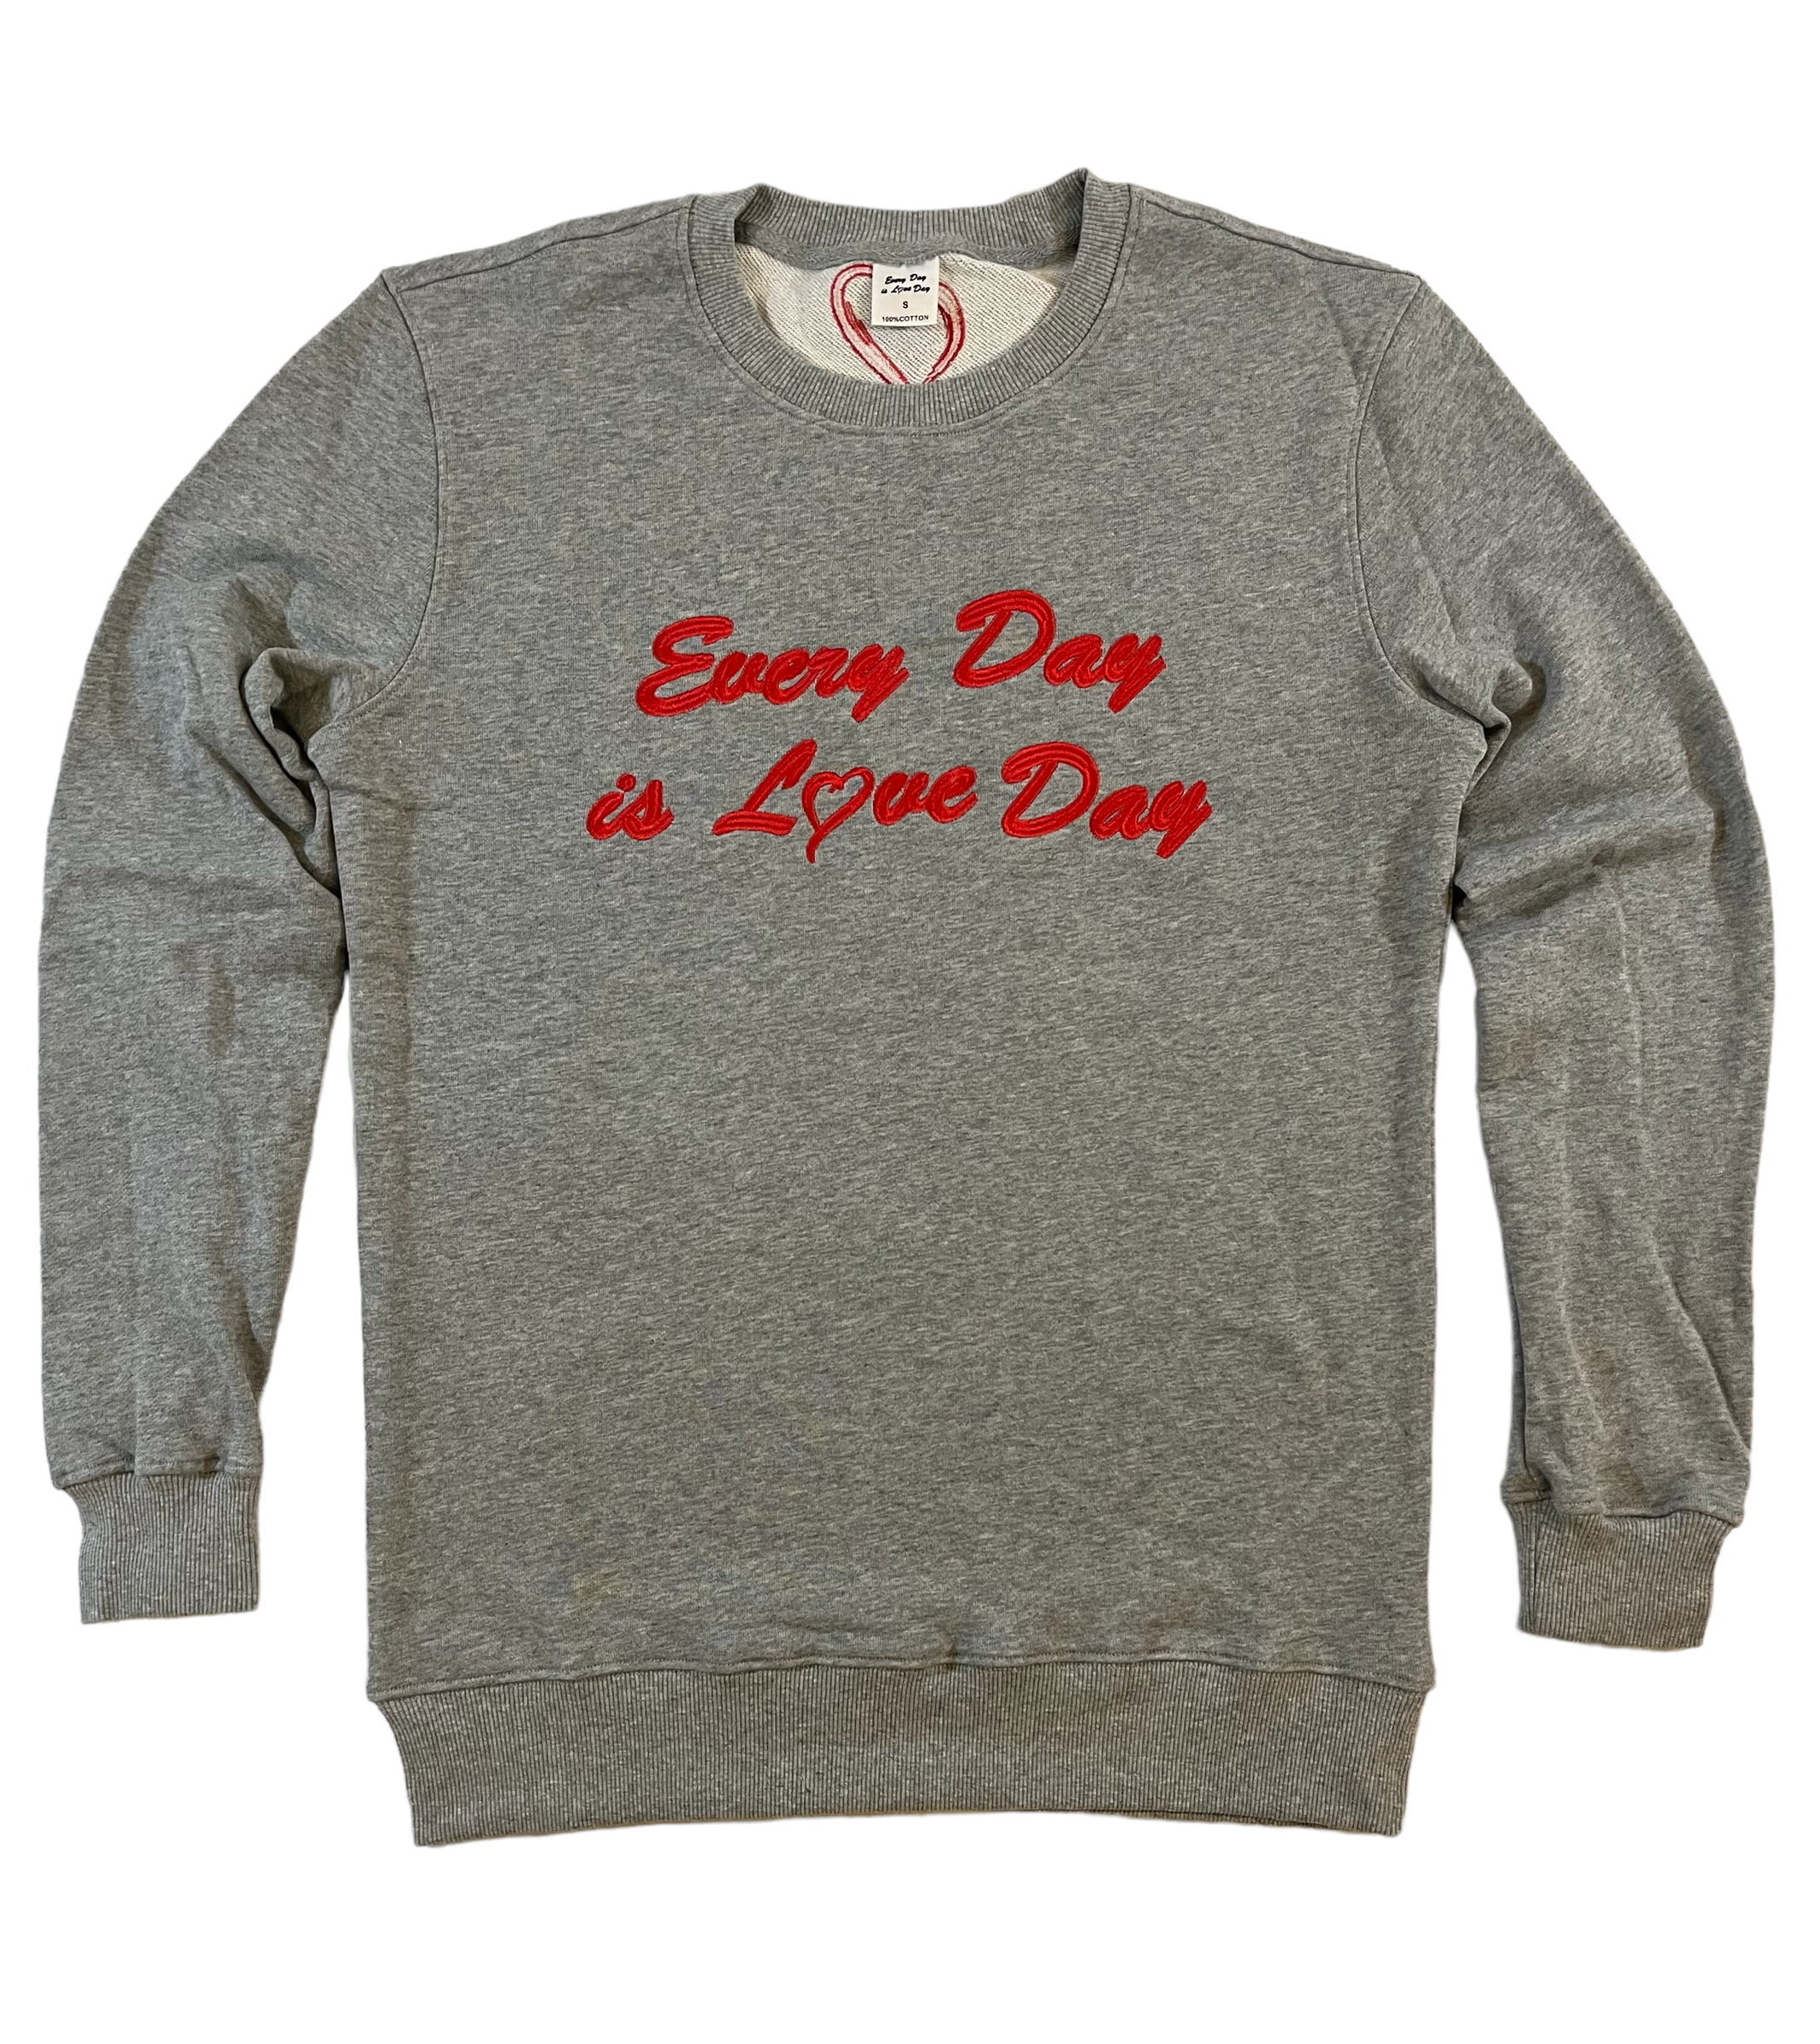 Crew Neck - Light Gray with Red Embroidery – Every Day is